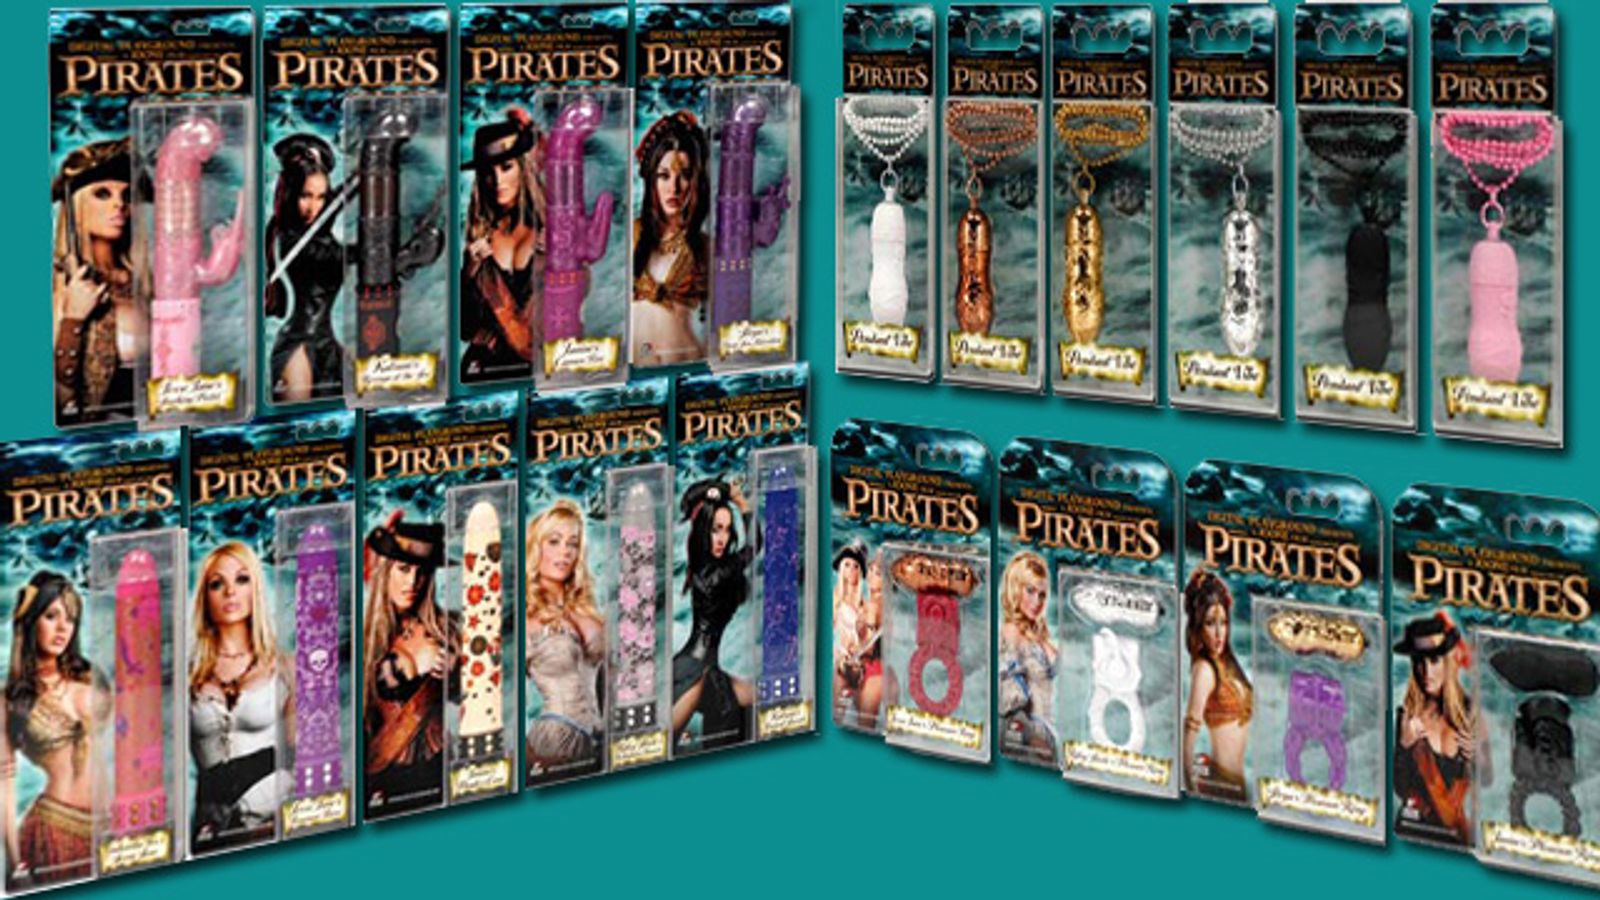 Digital Playground’s ‘Pirates’ Toy Line Gets Rave Reviews